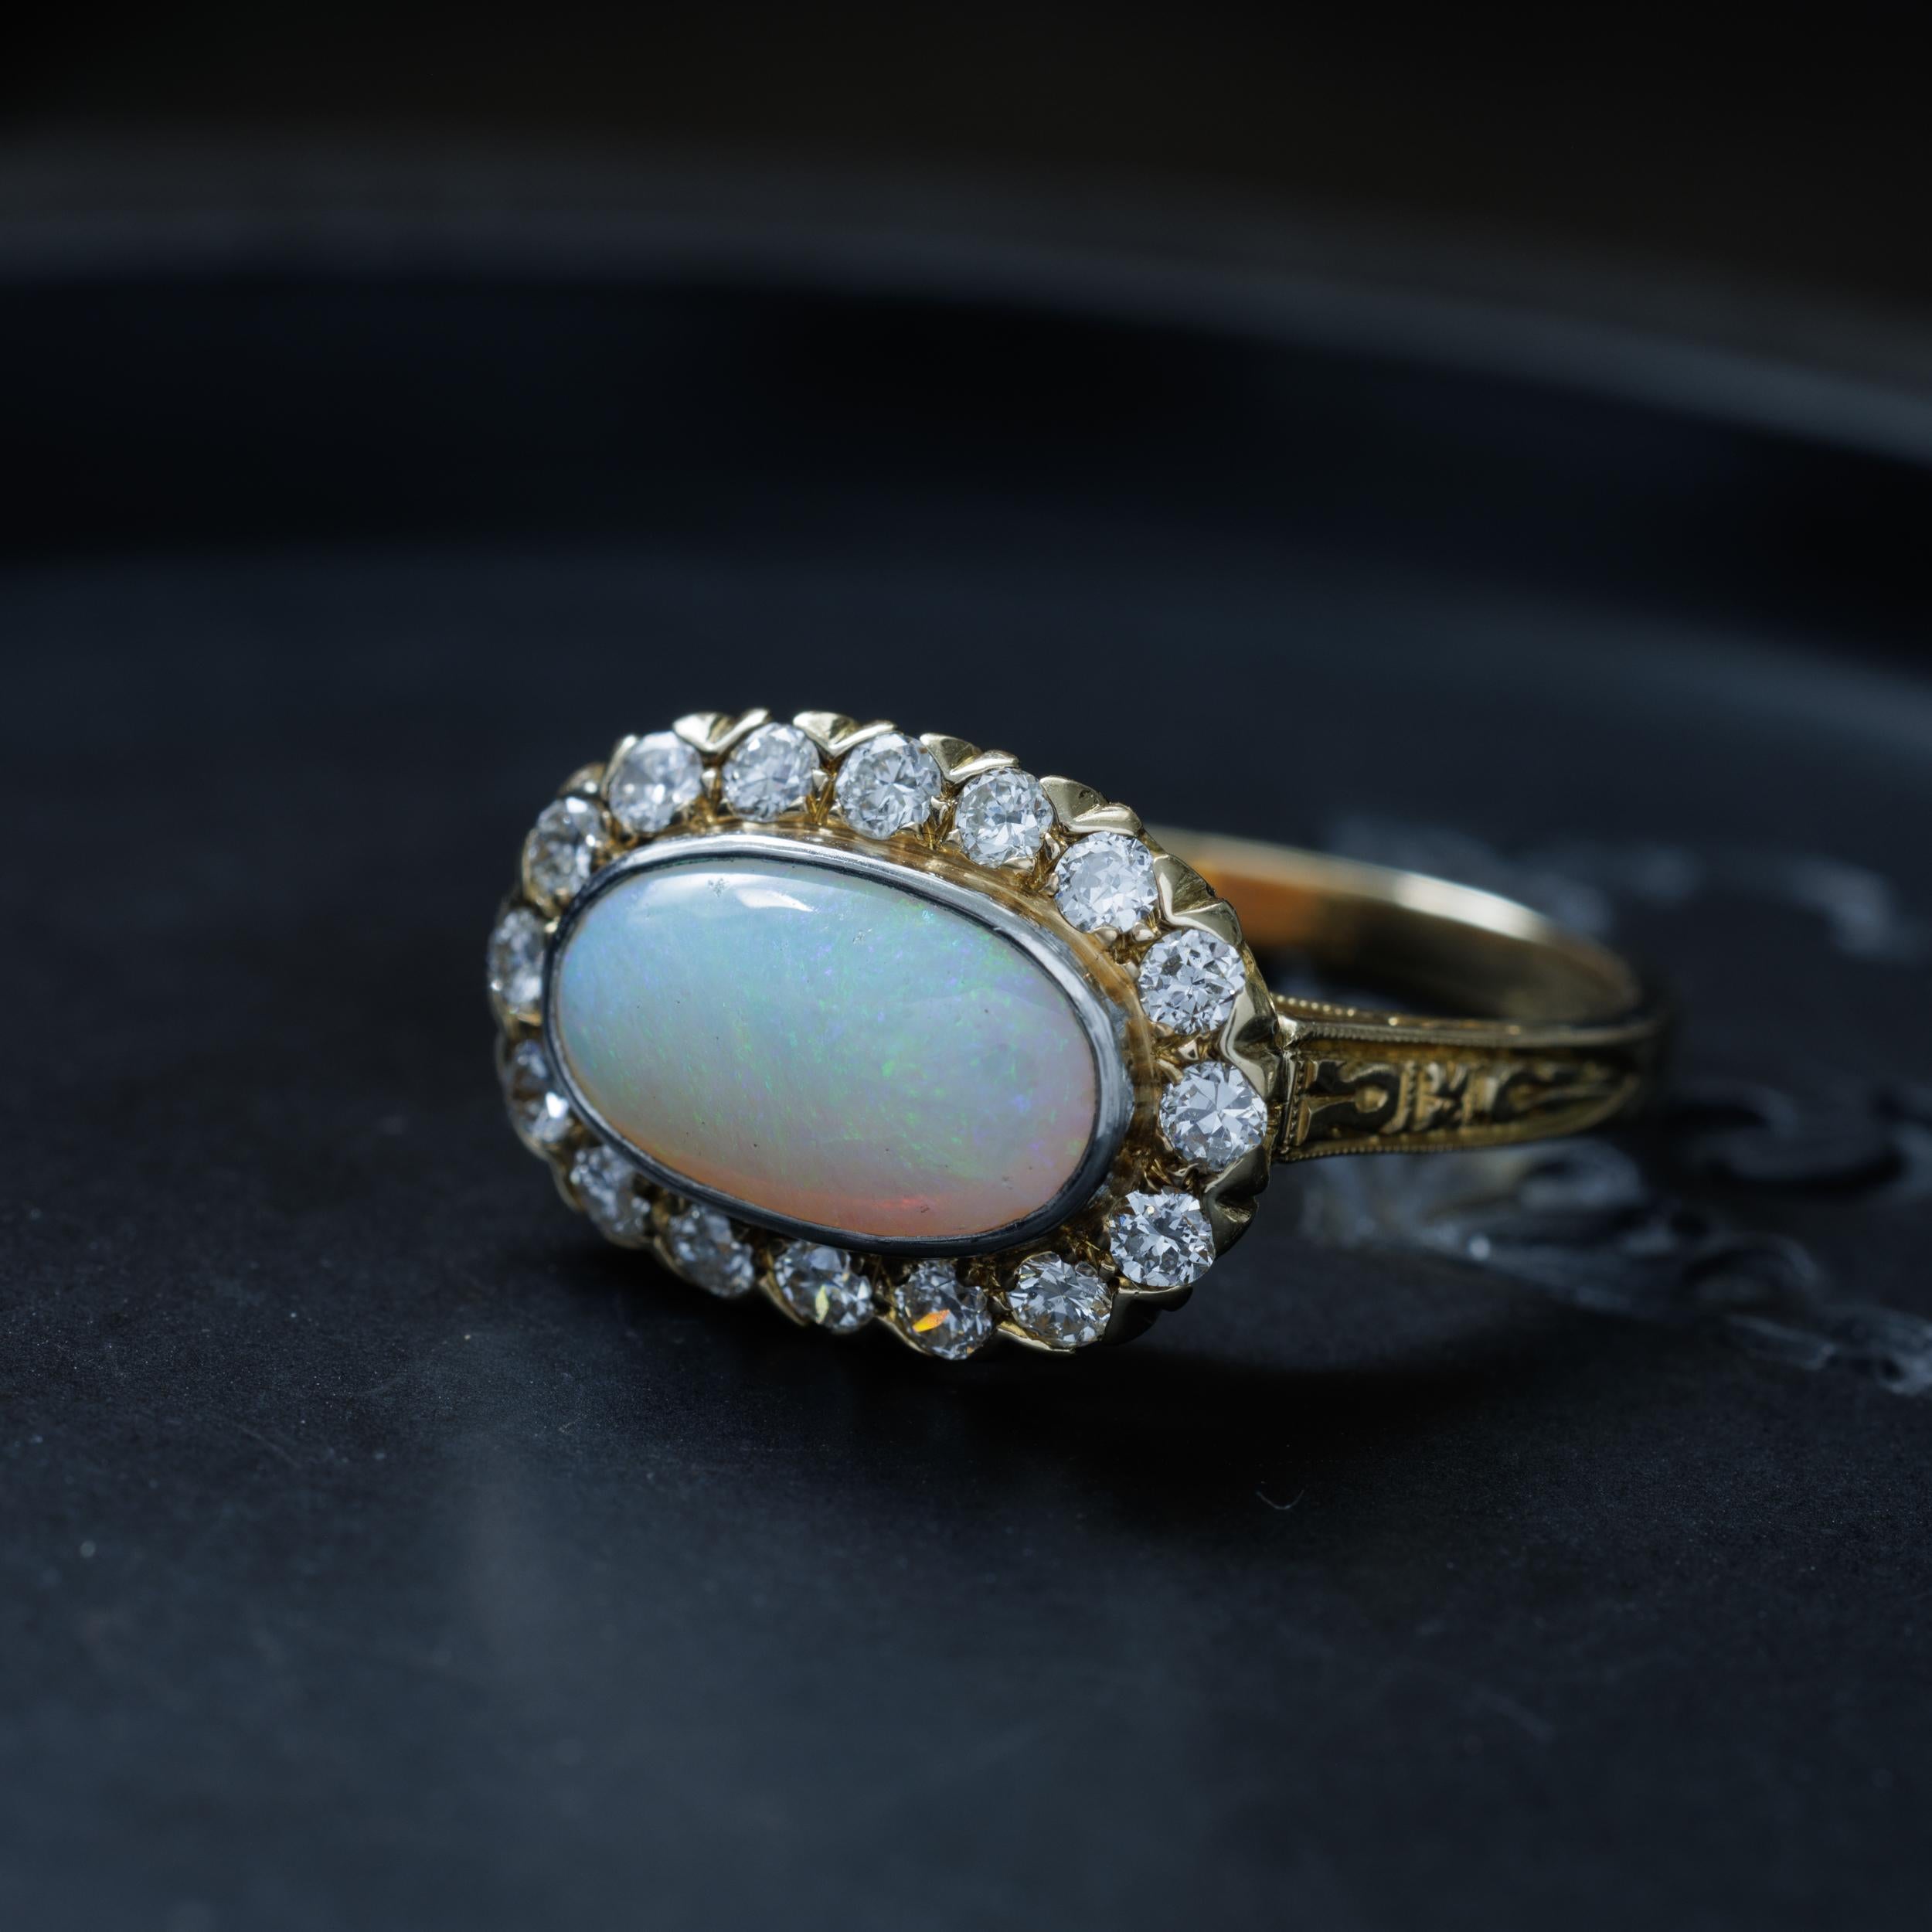 Vintage 14 Karat Yellow Gold and 1.8 Carat Opal Ring with 0.90 Carats Old European Cut Diamonds

H 1.2 cm x W 1.7 cm / 0.472 in. x 0.669 in
4 grams

Size 7.5 (sizable)